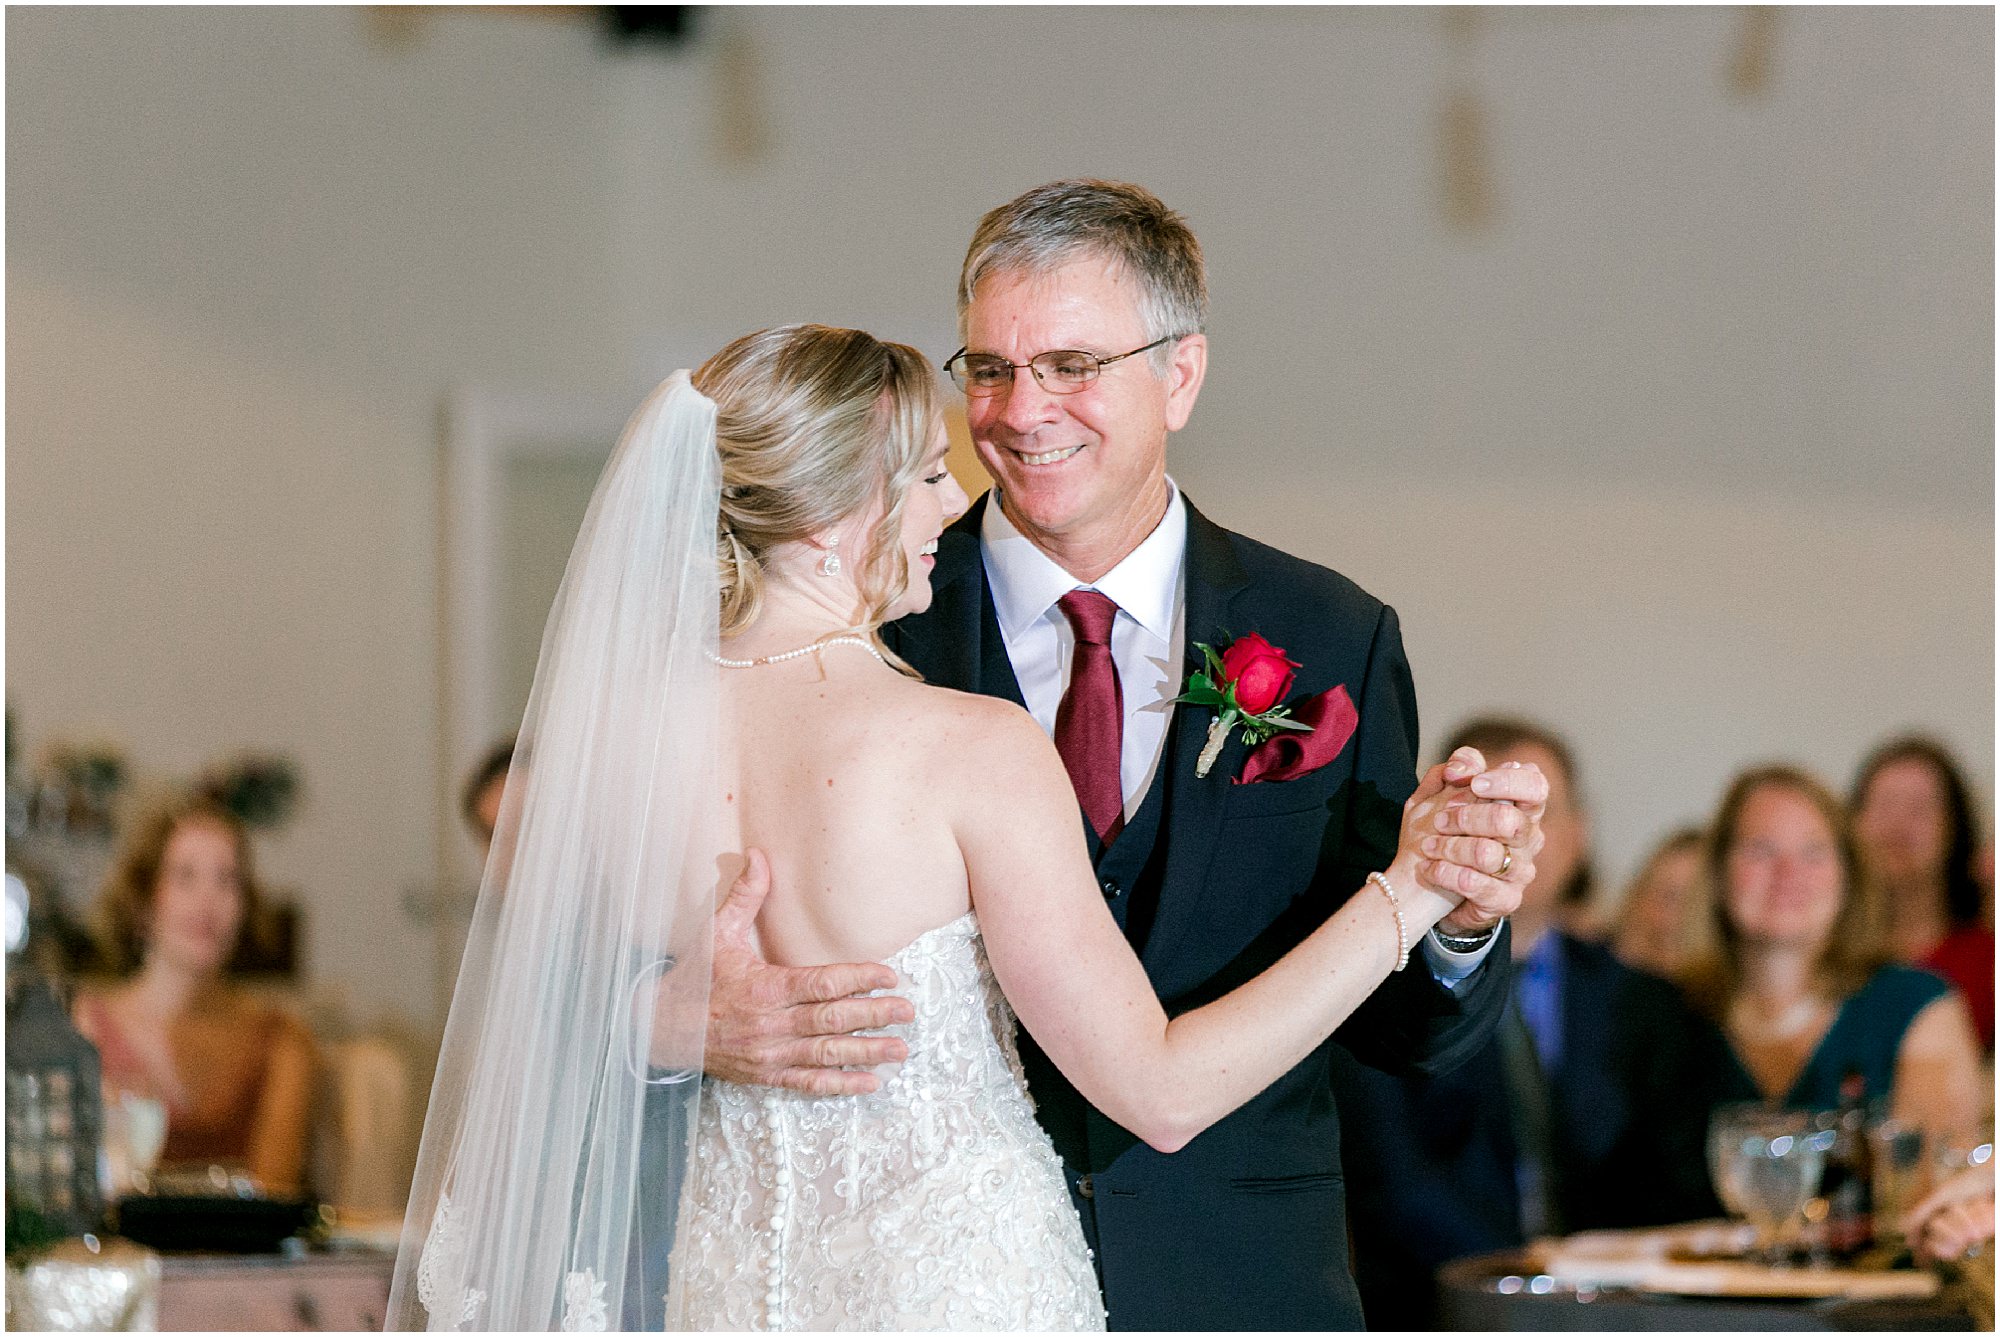 Bride and her father smiling as they dance together